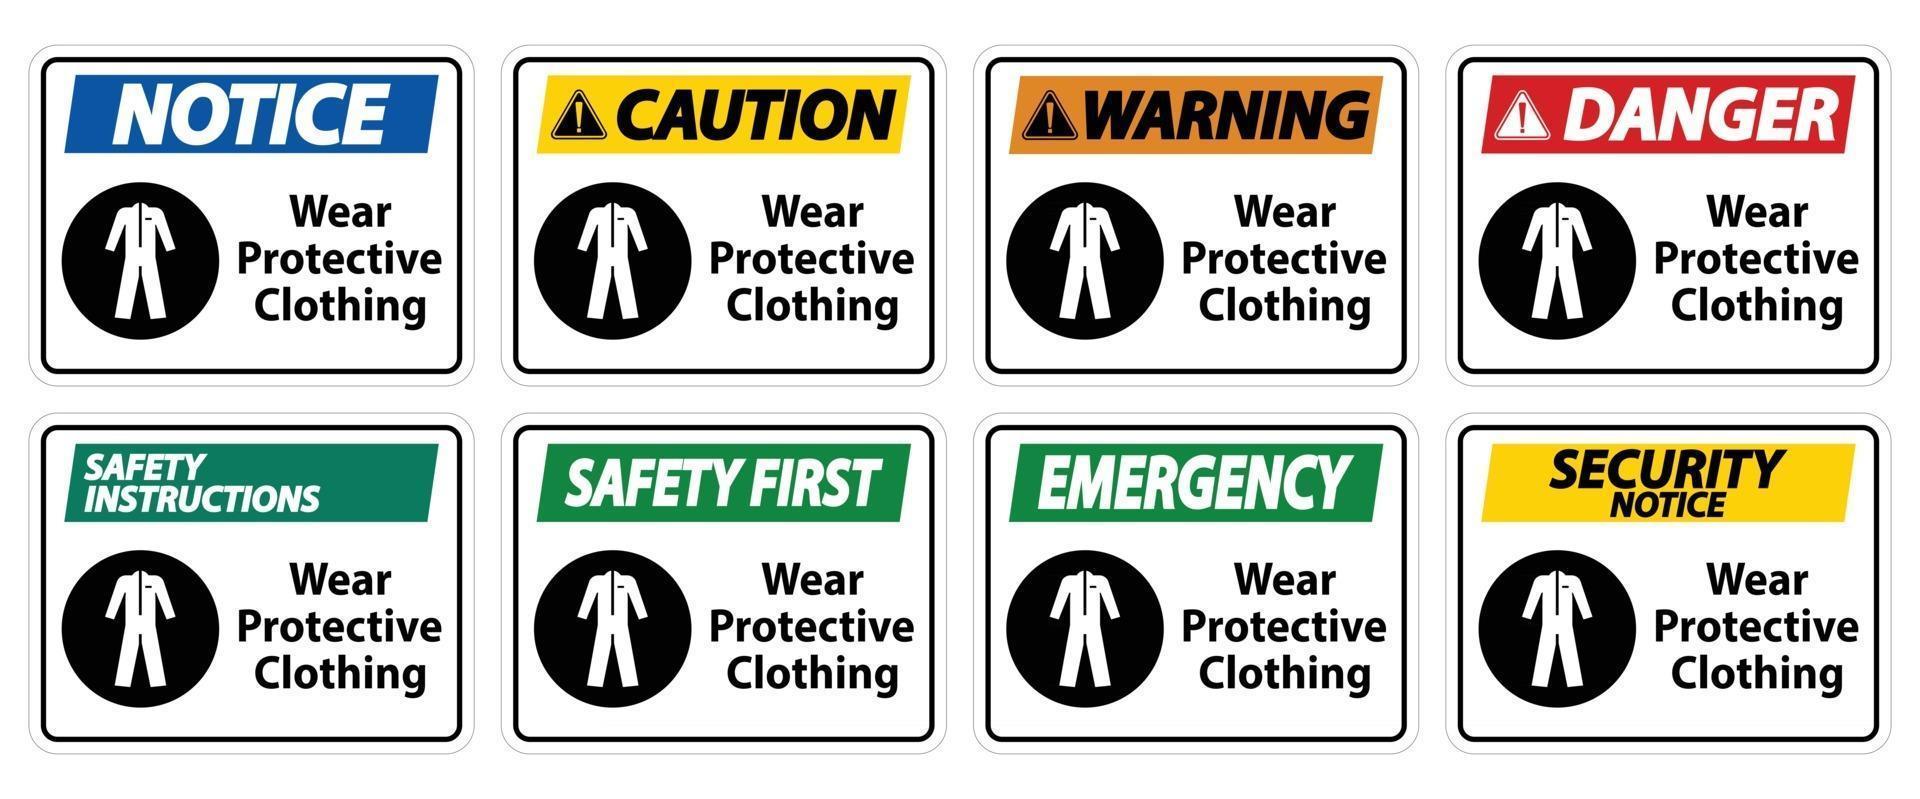 Wear protective clothing sign on white background vector